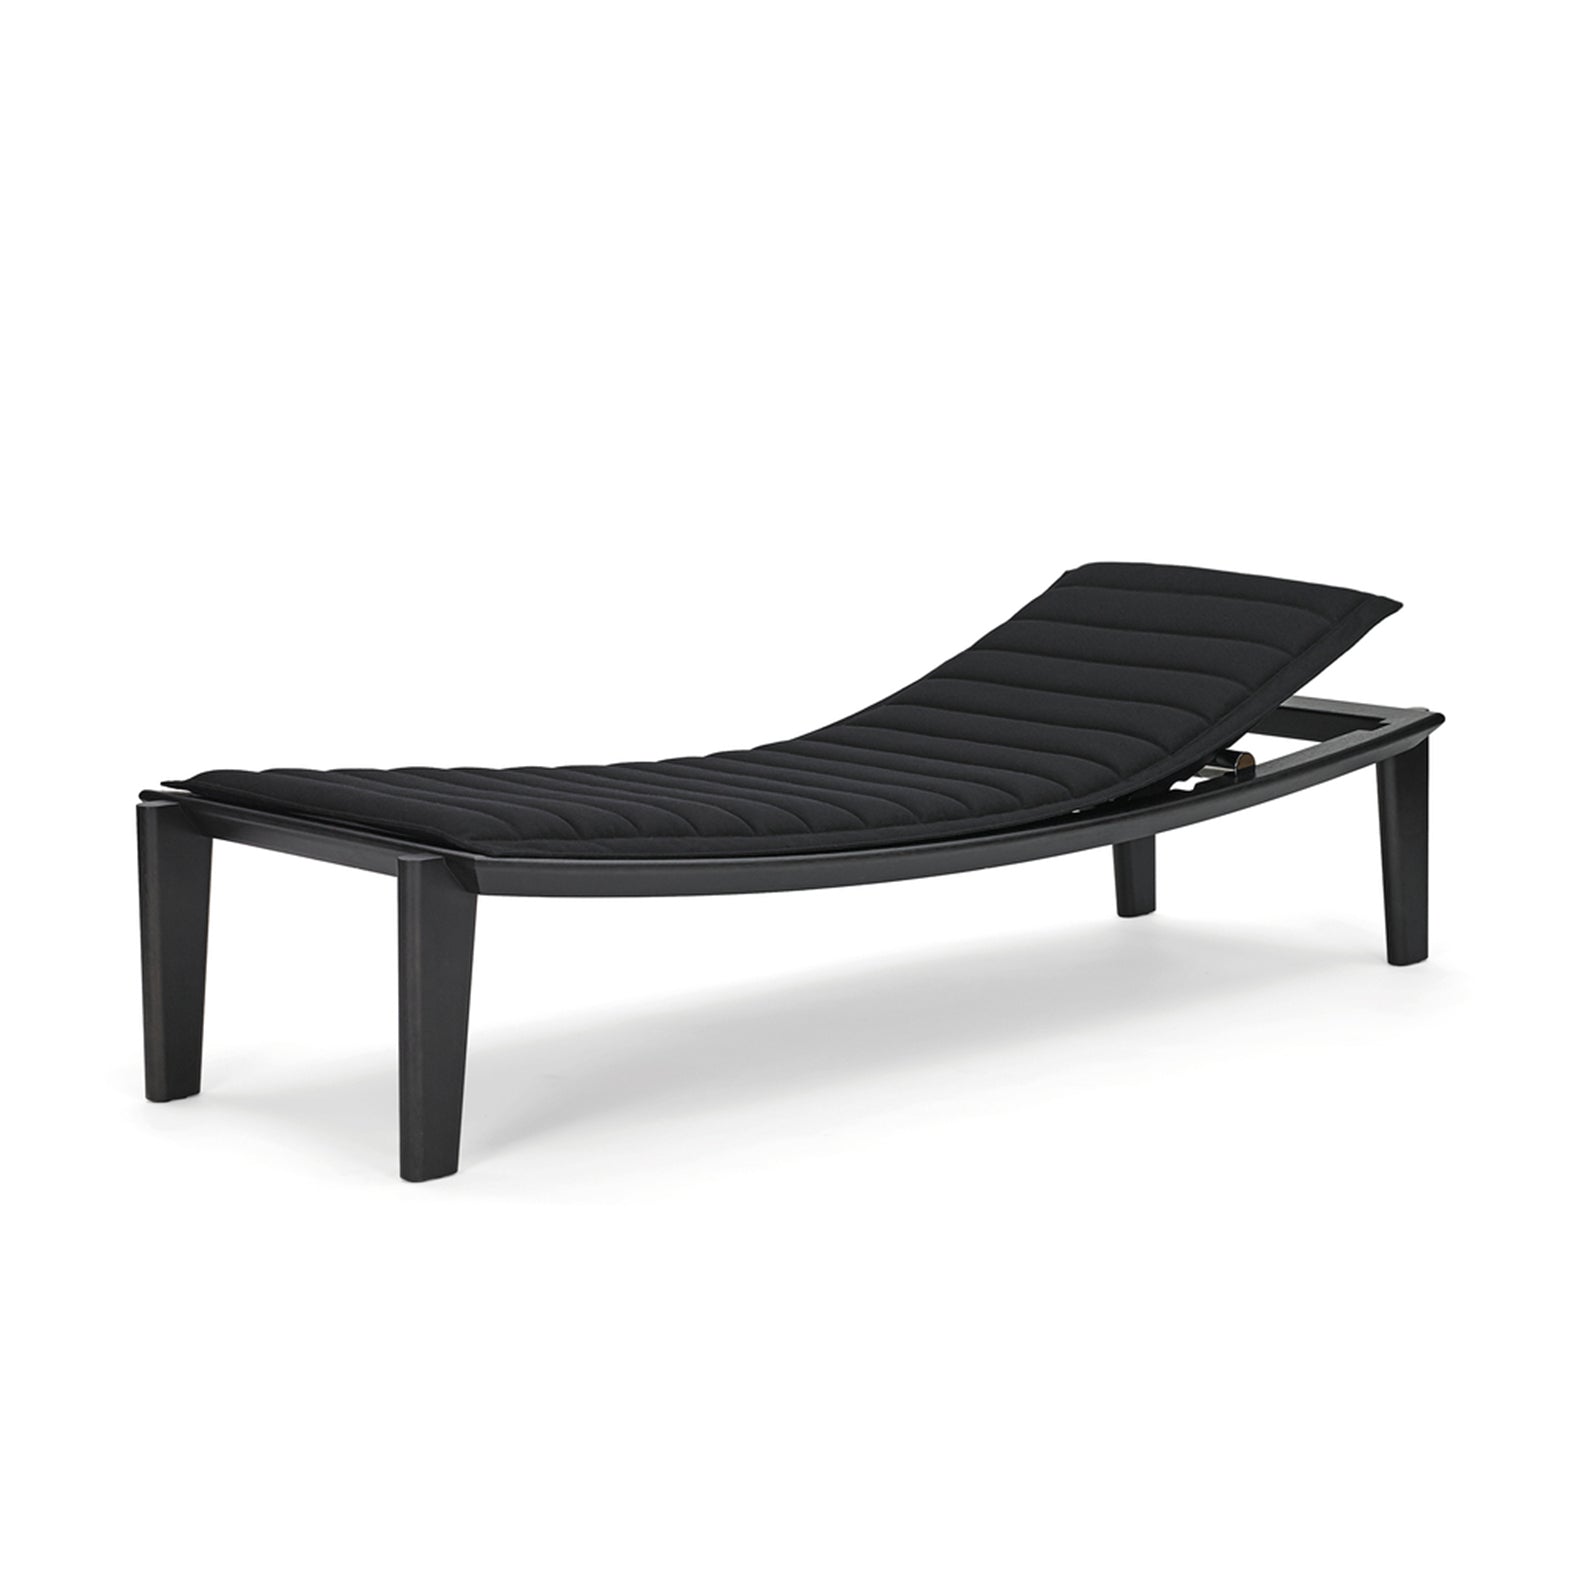 Ulisse Chaise Lounge